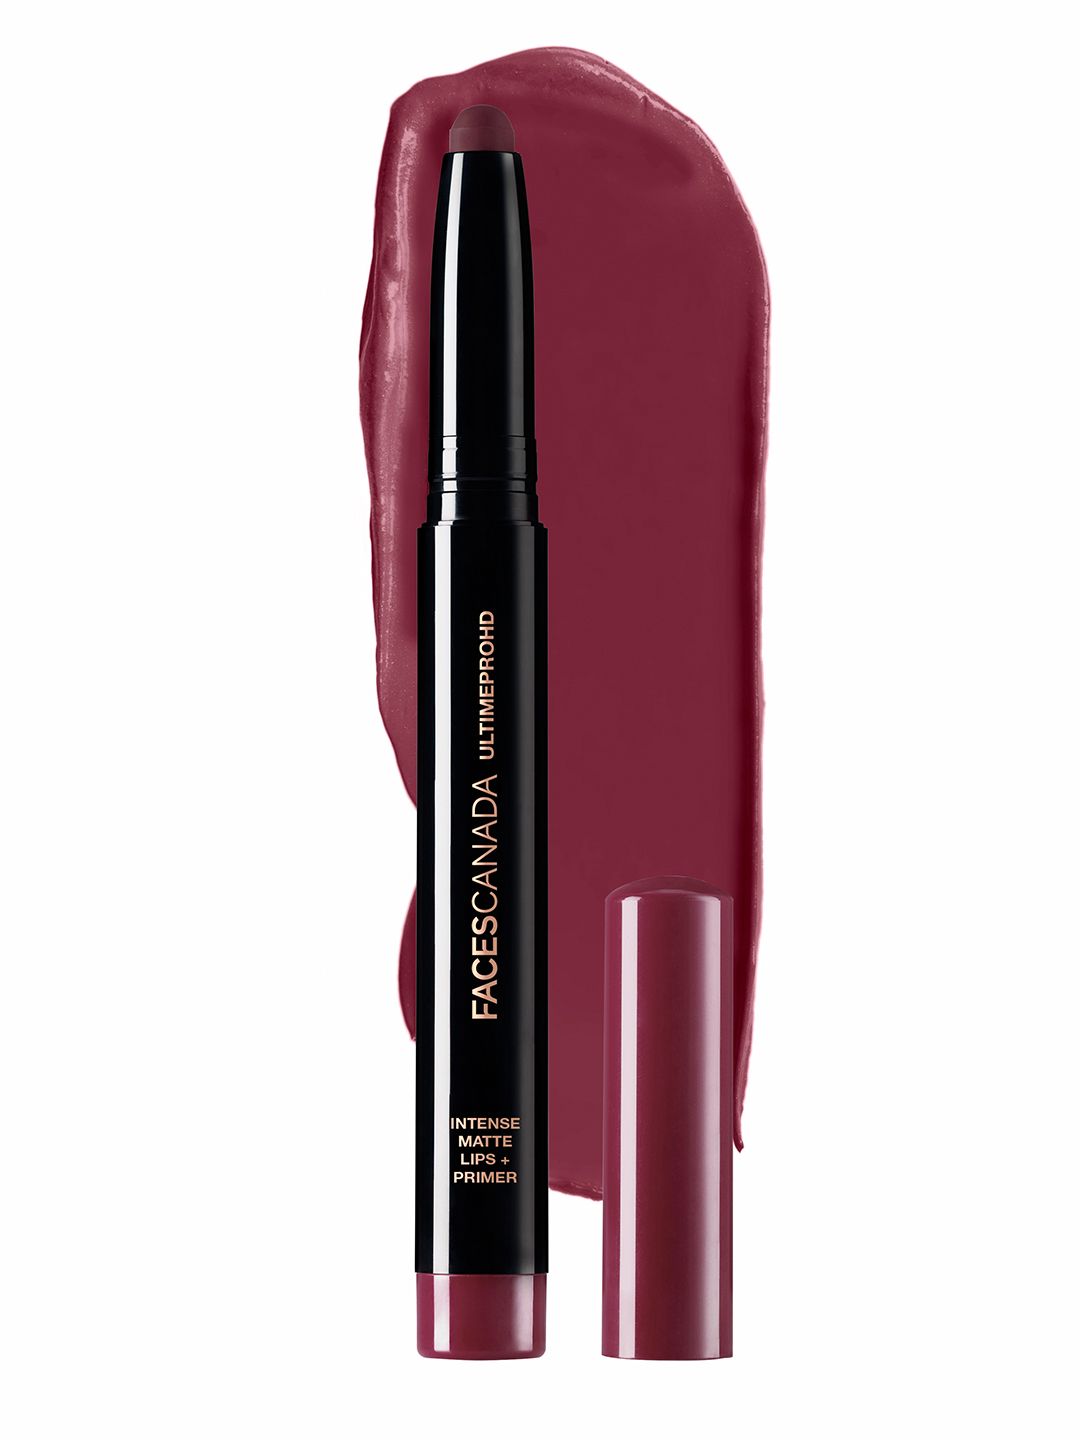 FACES CANADA Ultime Pro HD Intense Matte Lips + Primer Wine Shot 26 1.4g Price in India